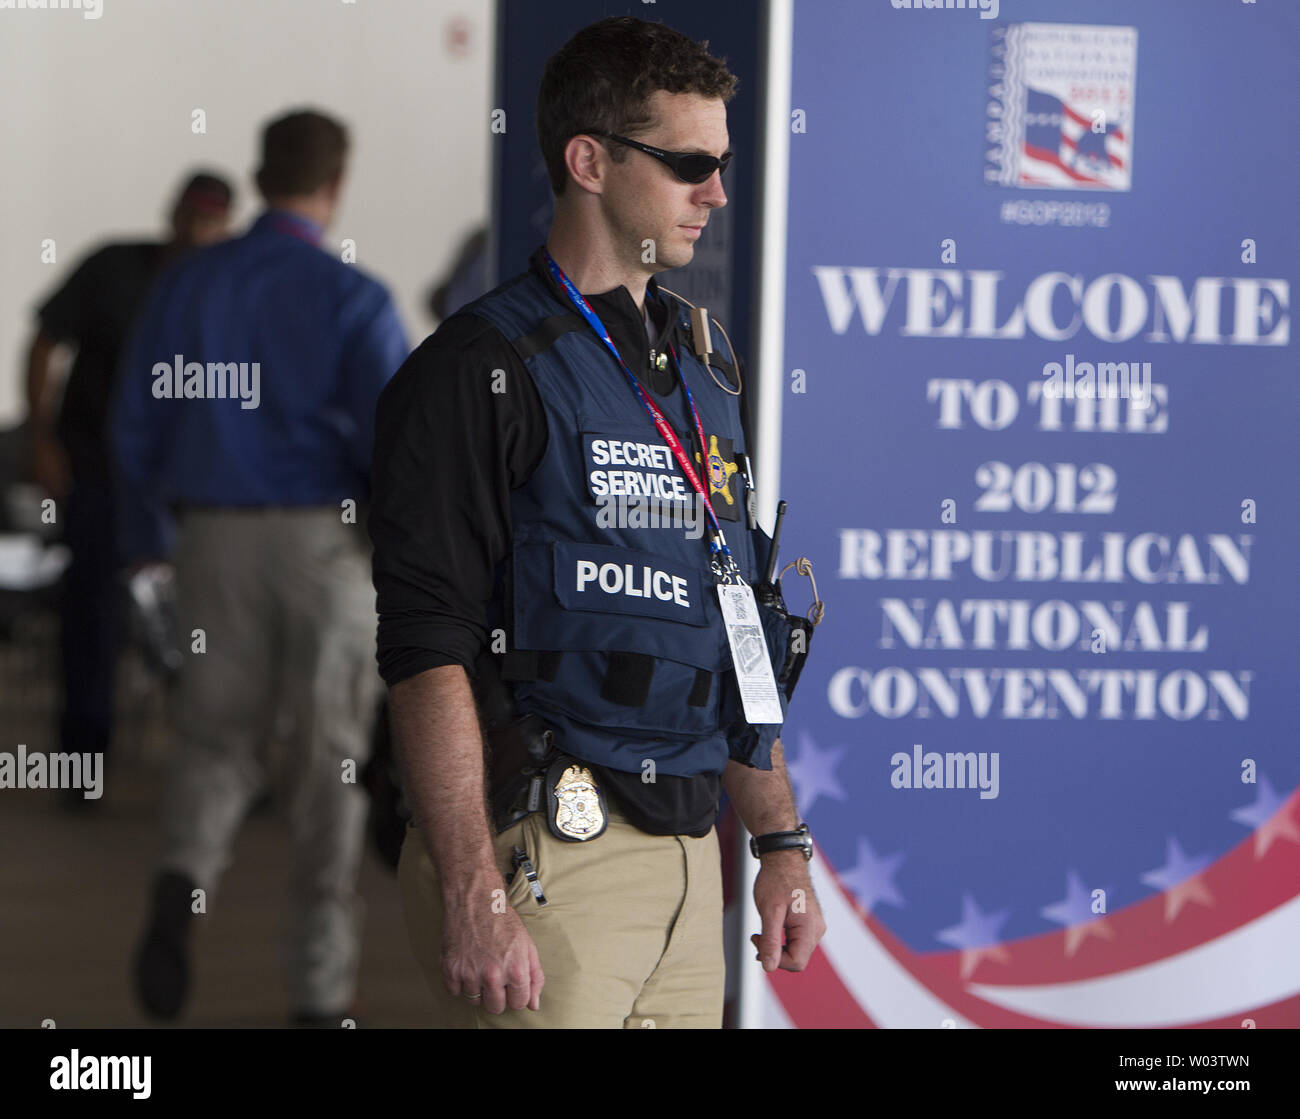 Delegates arriving early pass a Secret Service agent stationed at an entrance at the 2012 Republican National Convention at Tampa Bay Times Forum in Tampa on August 28, 2012.   UPI/Gary C. Caskey Stock Photo